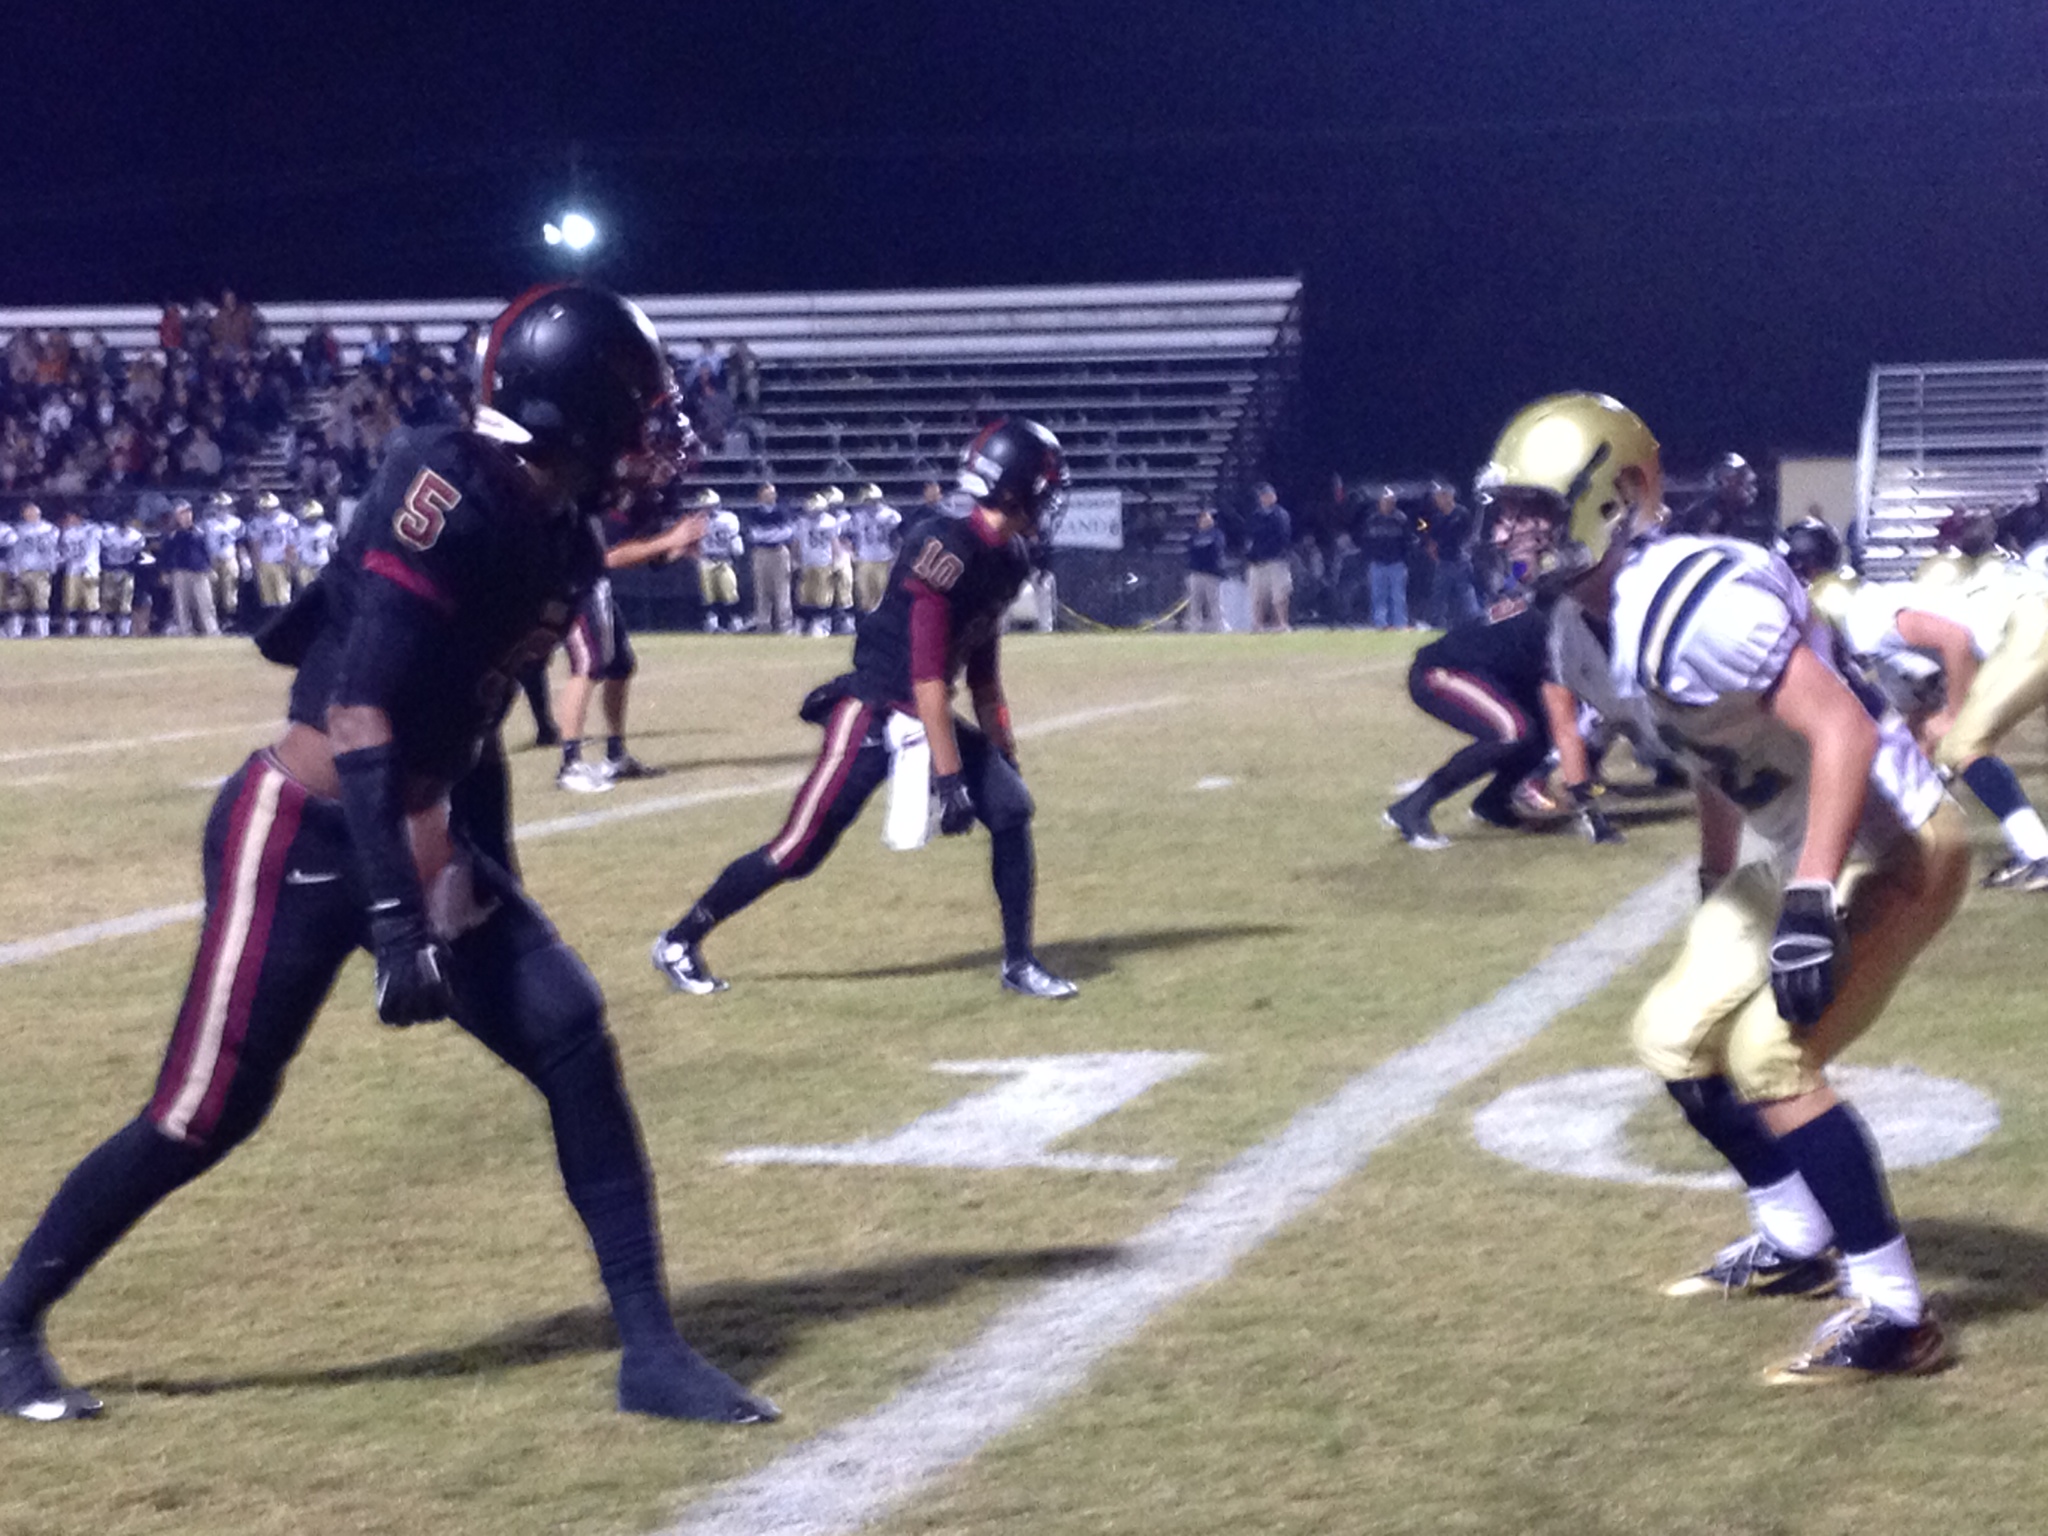 Cougars look playoff ready against Oak Mountain, win 36-25